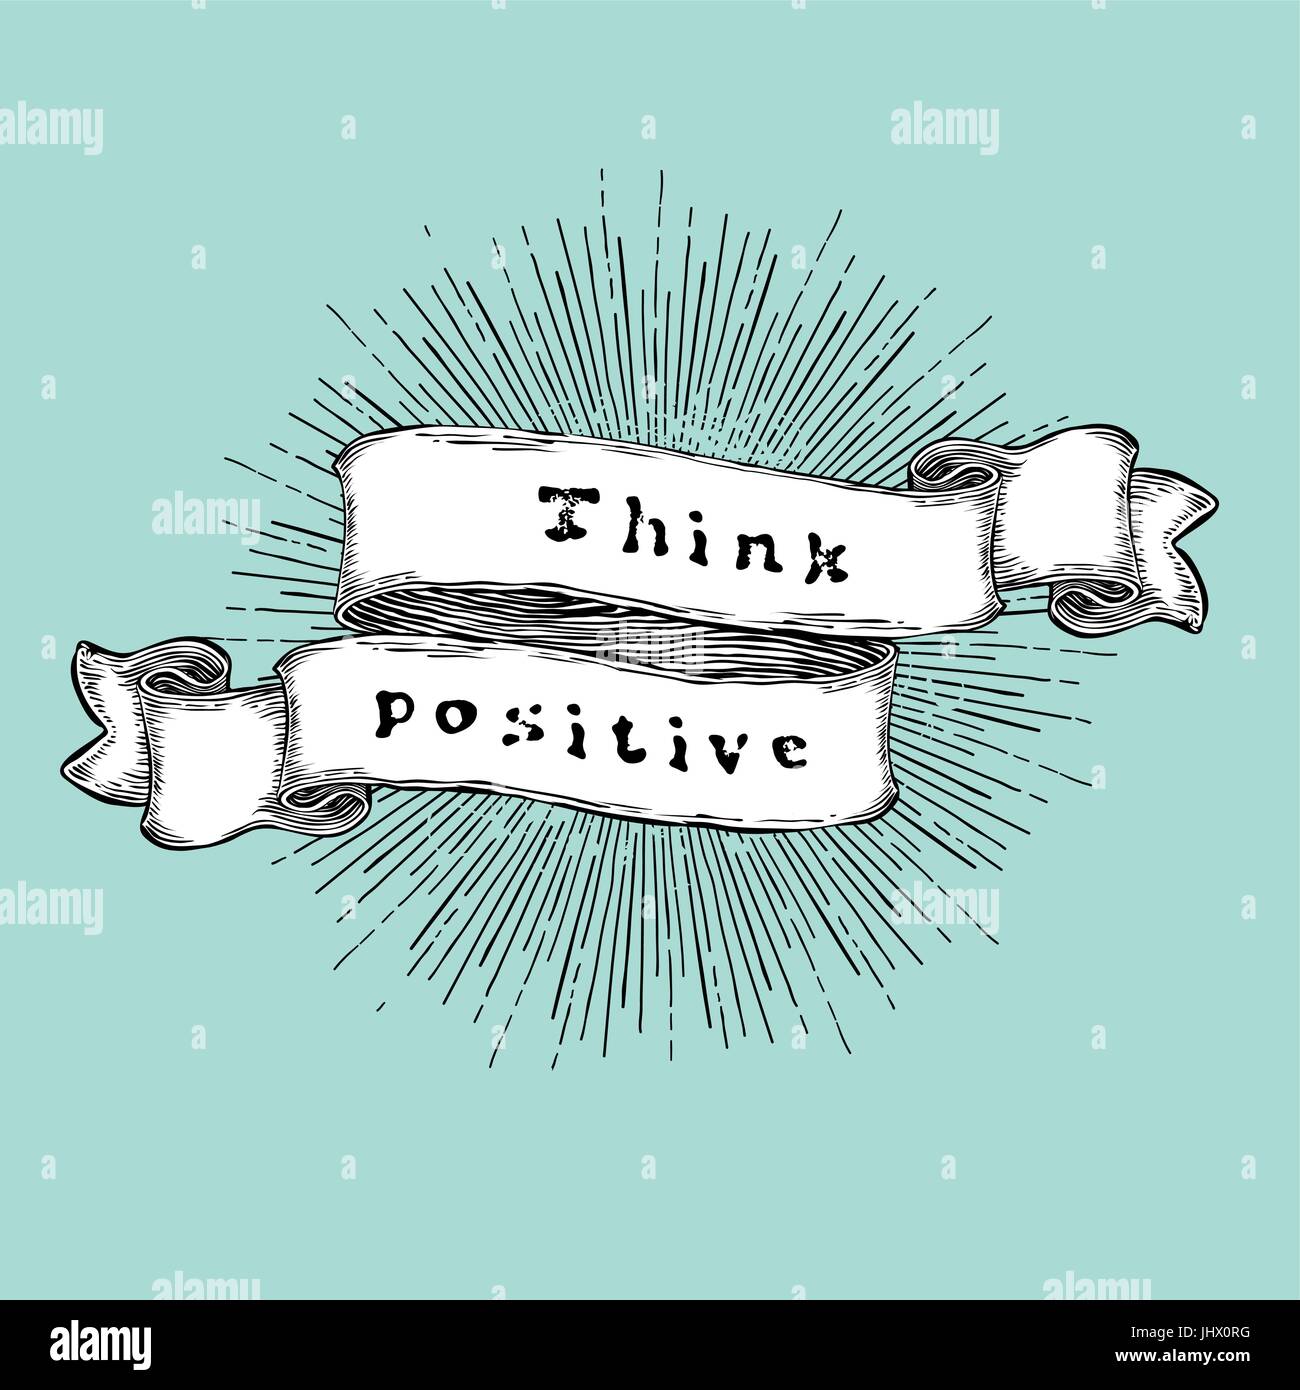 Think positive. Inspiration quote. Vintage hand-drawn quote on ribbon. Stock Vector